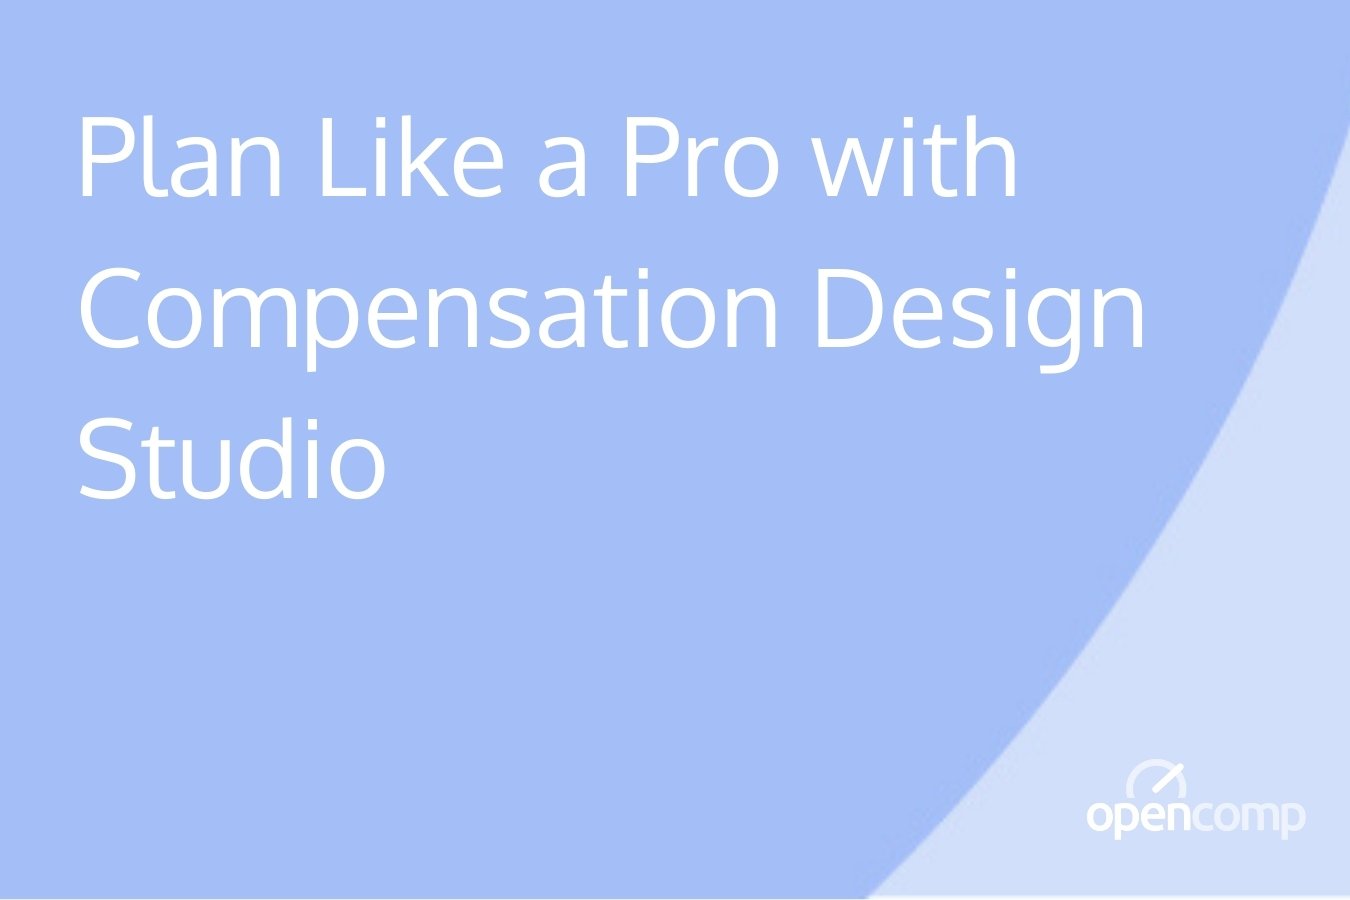 Plan Like a Pro with Compensation Design Studio